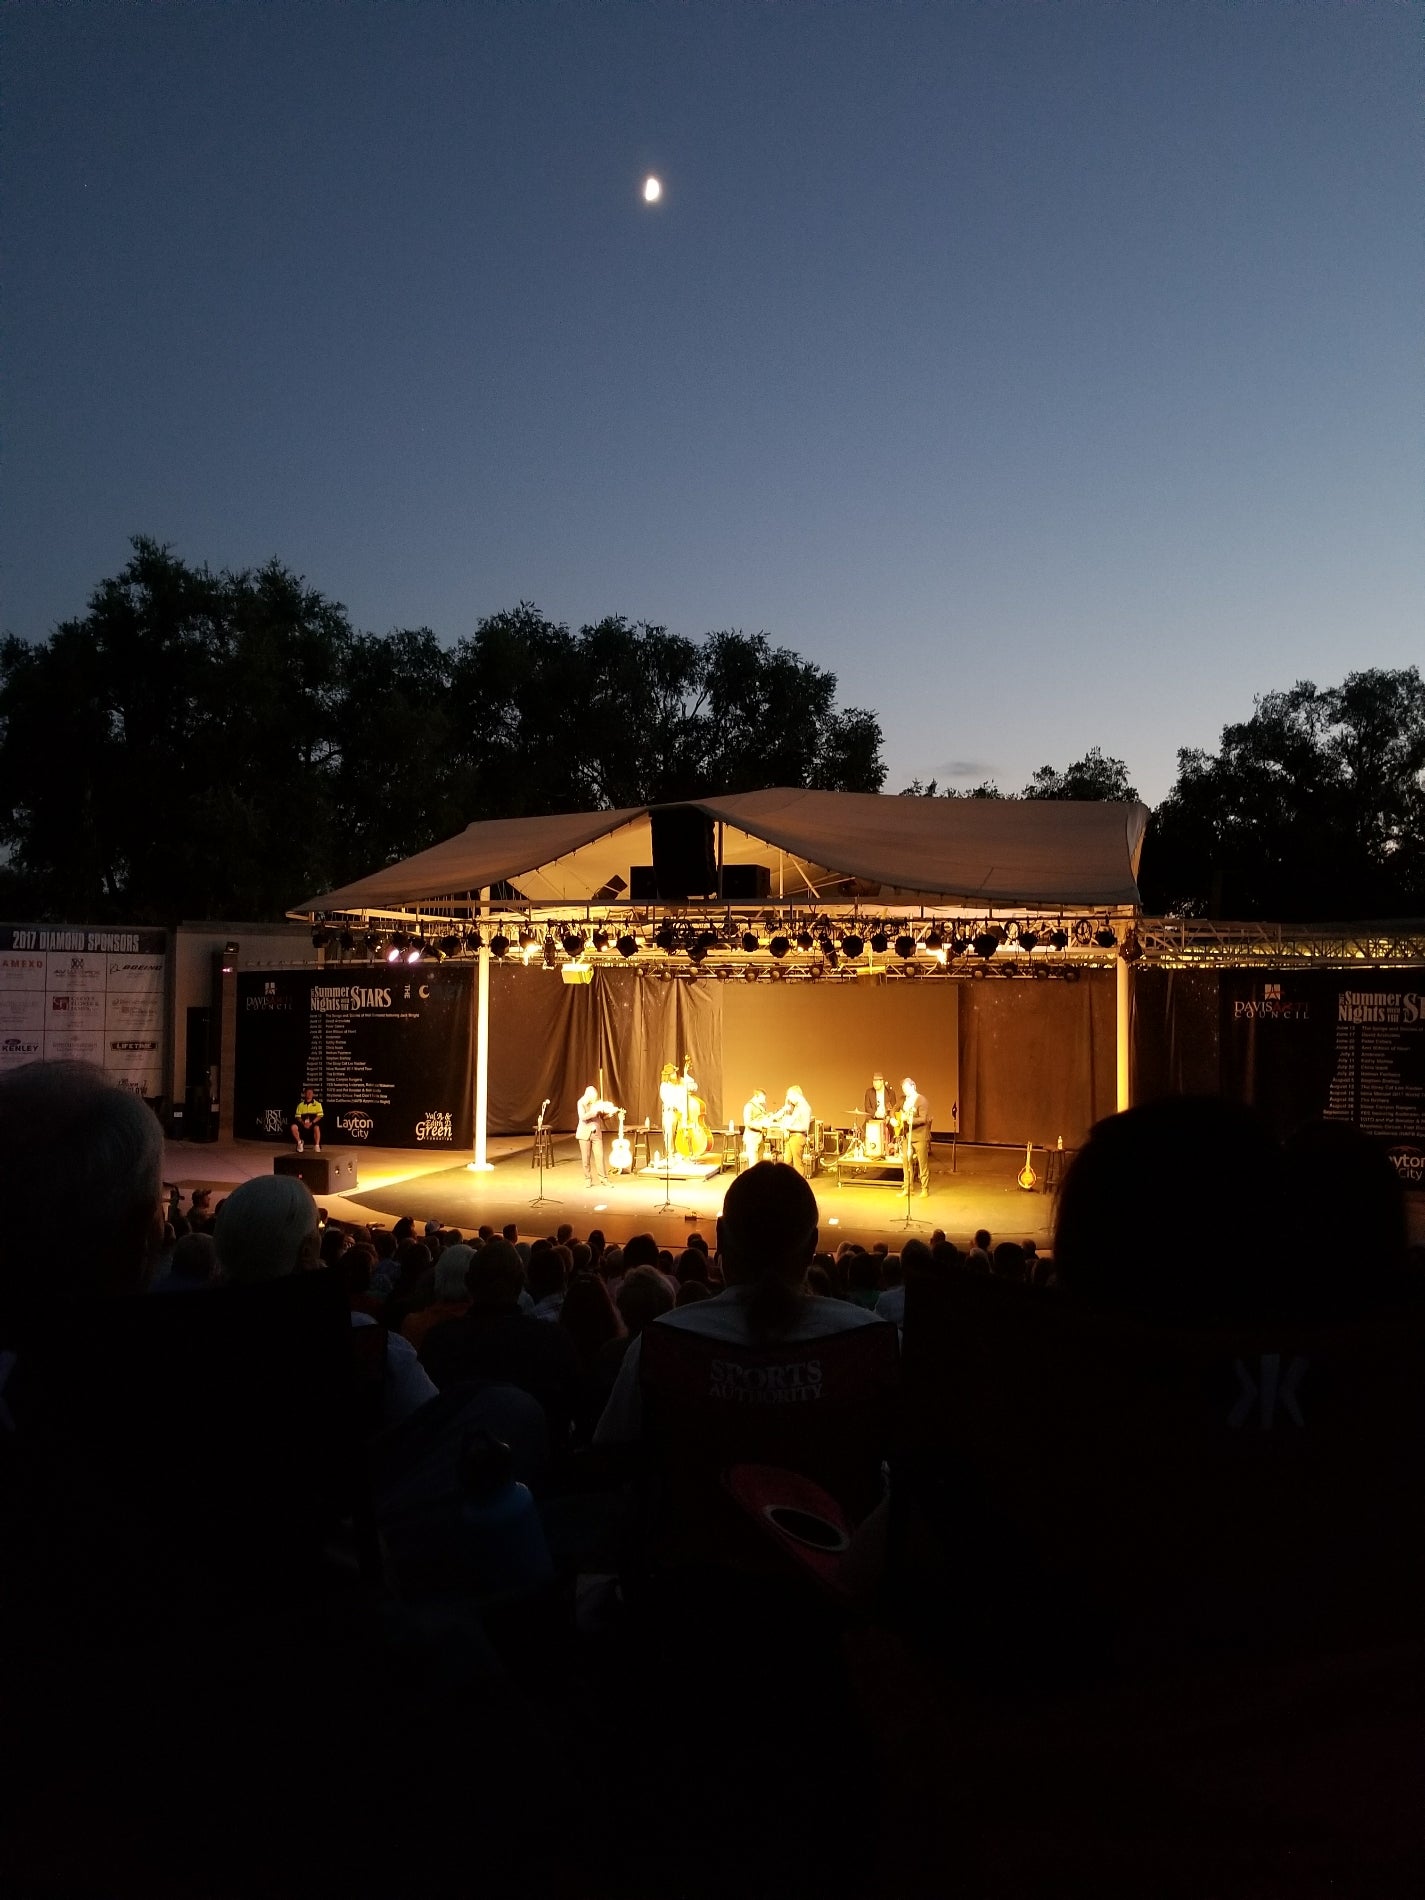 Layton Heritage Museum Ed Kenly Centennial Amphitheater, 403 Wasatch Dr